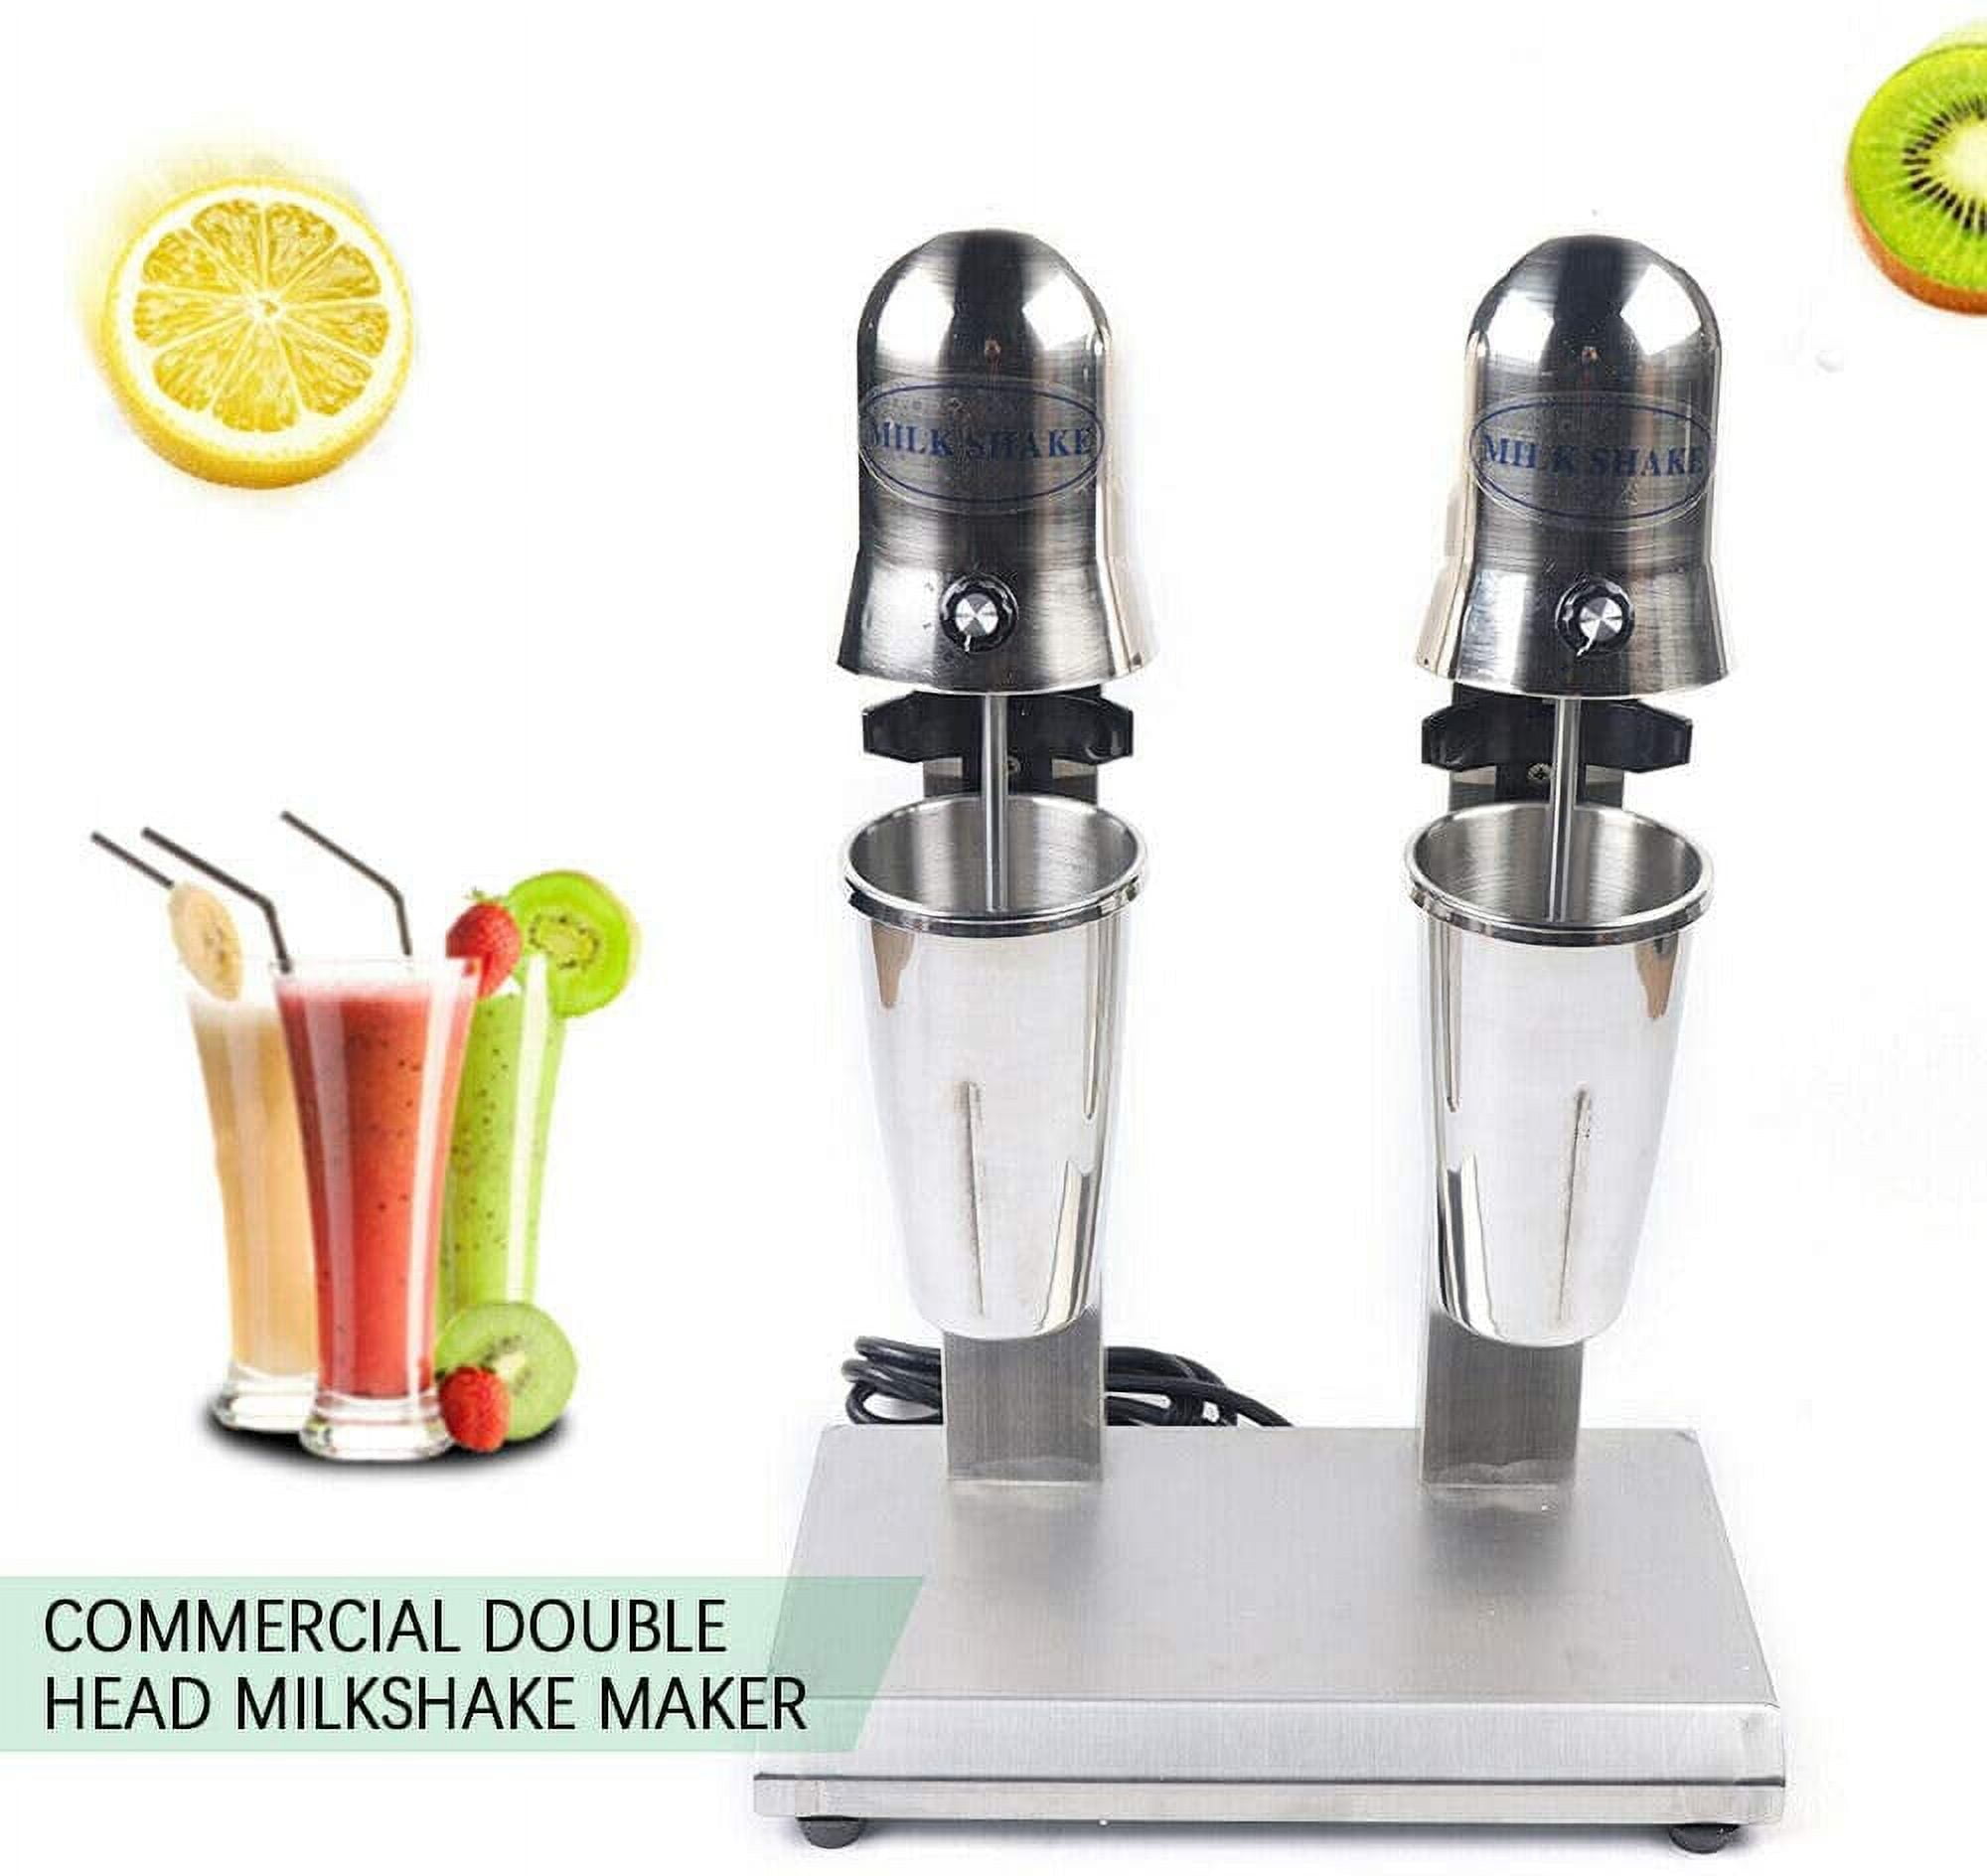 Electric Cocktail Shaker - Professional Quality Mixer Machine - Black